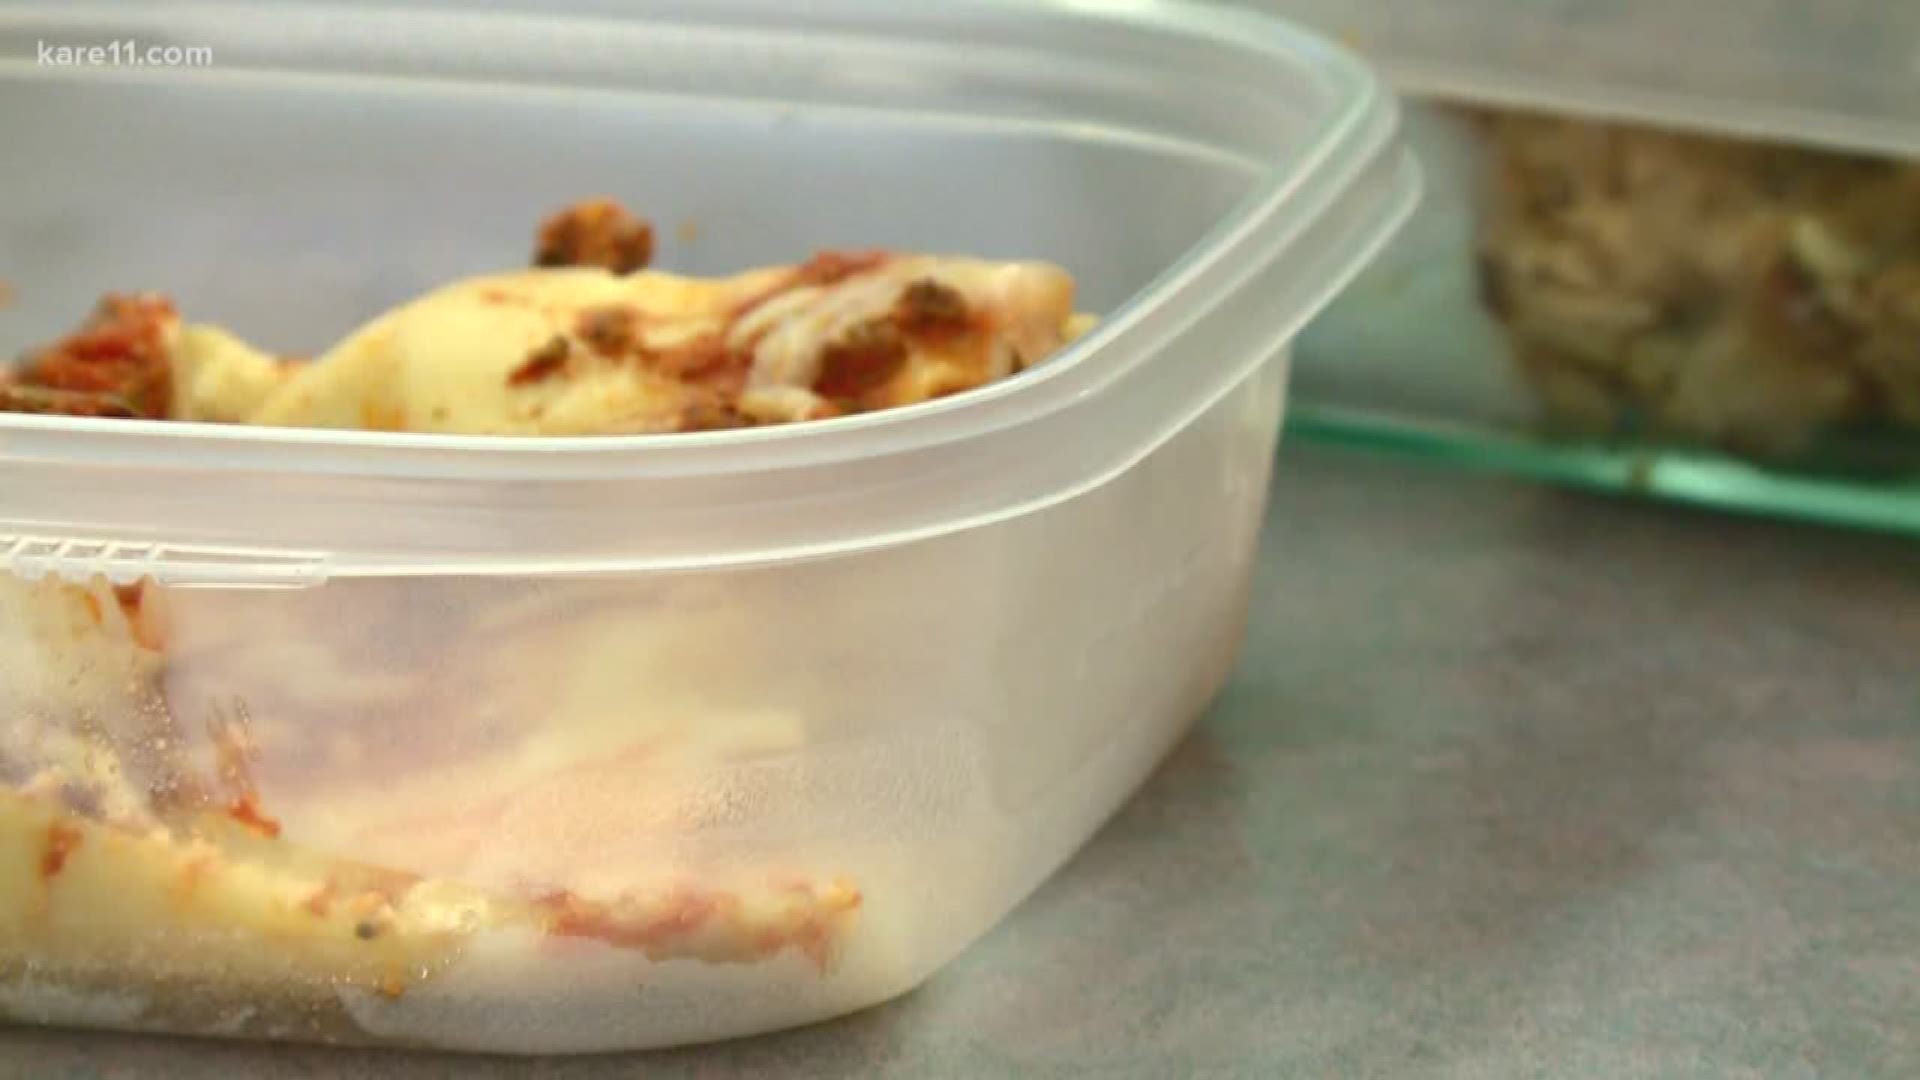 Can You Microwave Food in Plastic Containers?